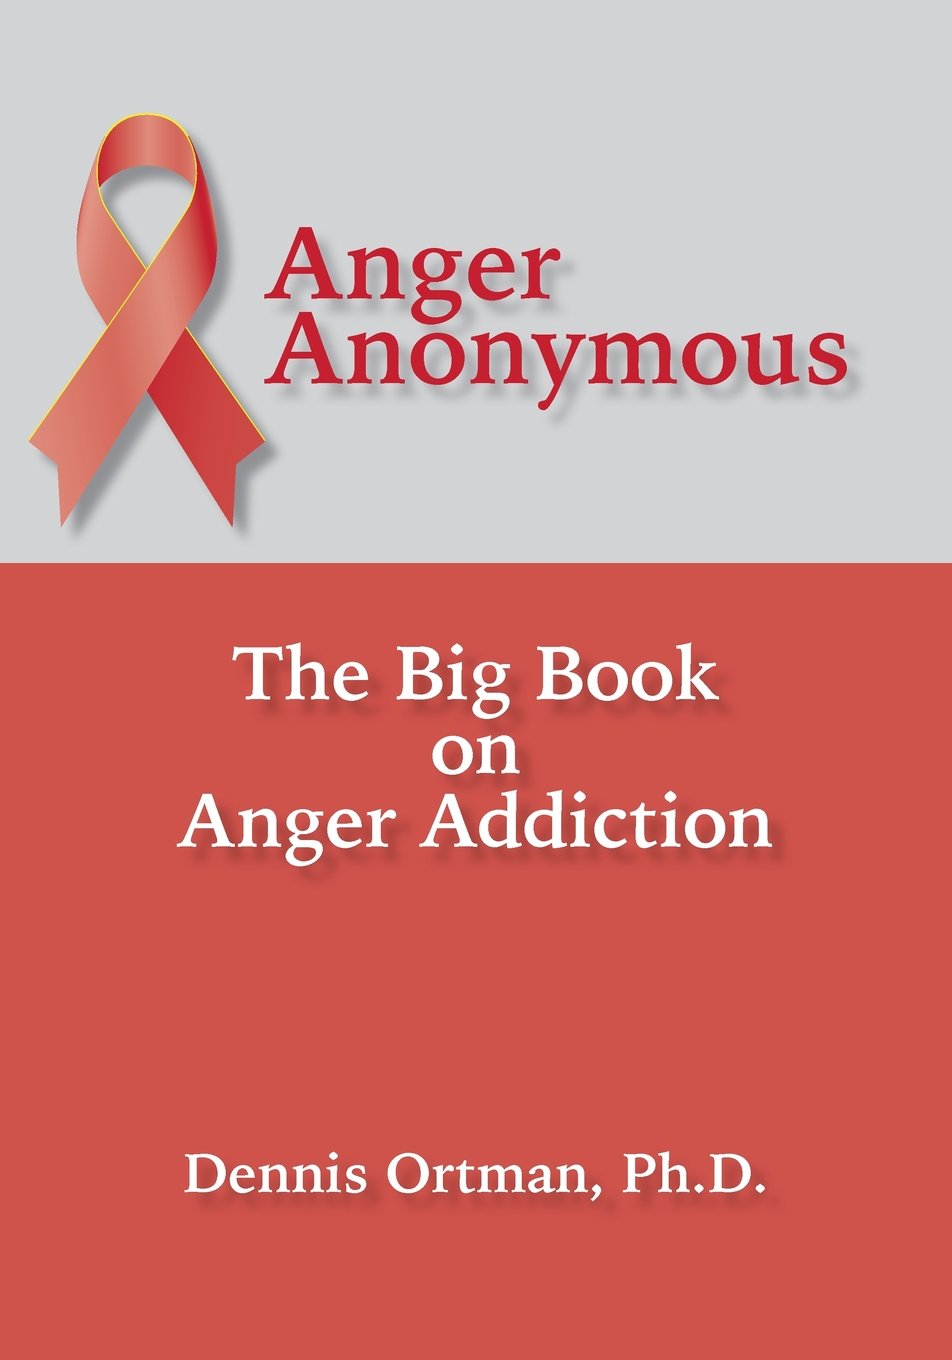 Straight From the Author 01: Dr Dennis Ortman Anger Anonymous 